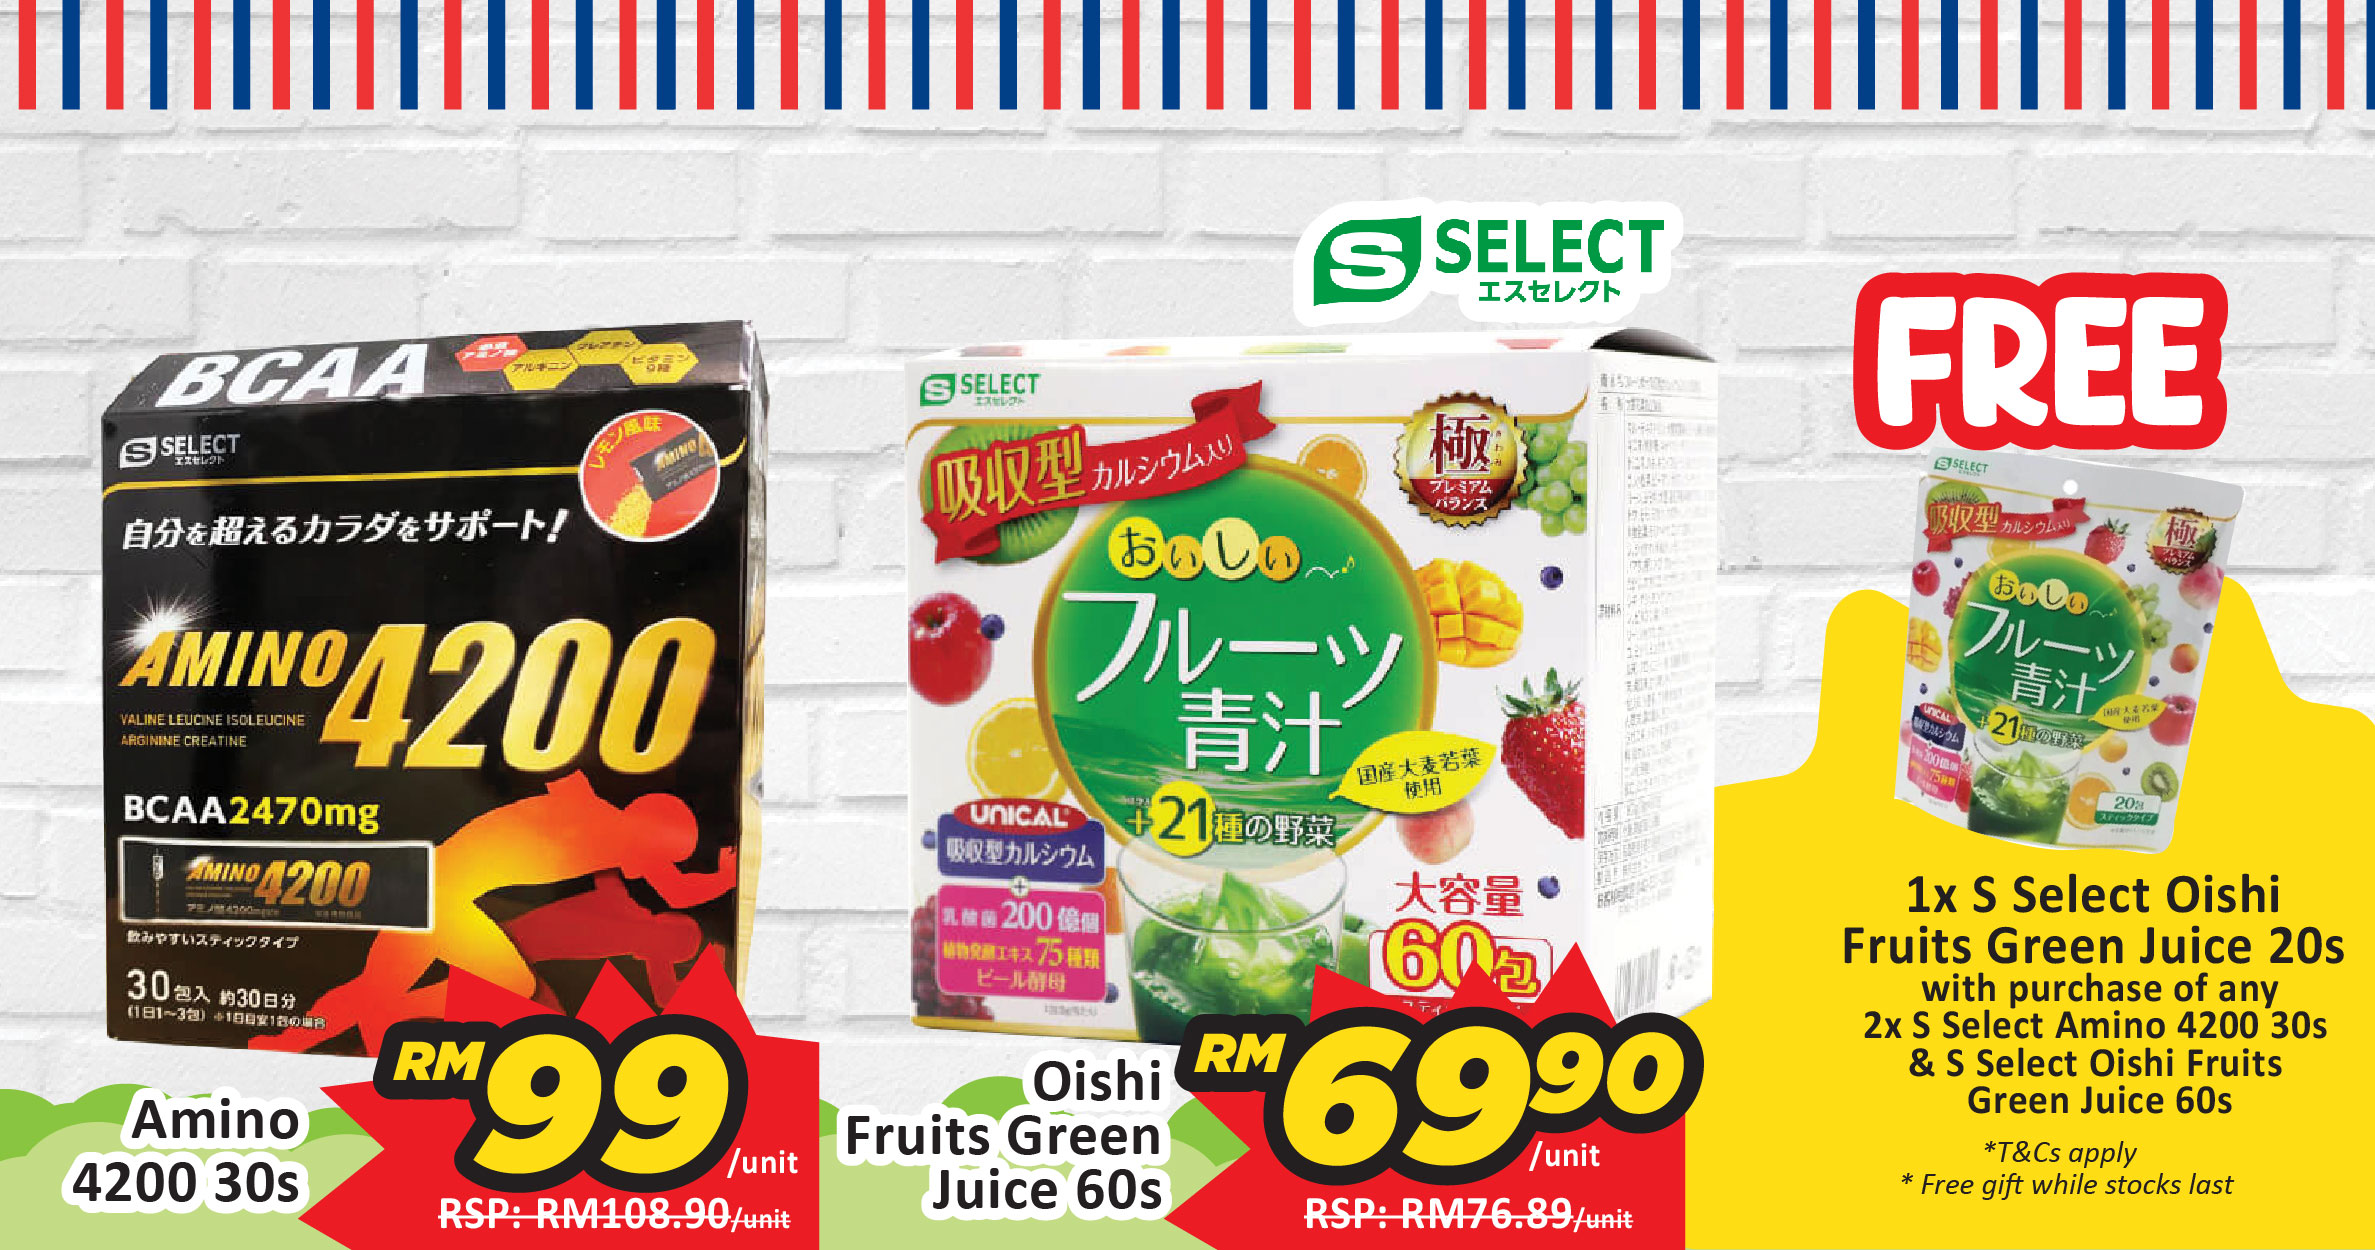 https://www.alpropharmacy.com/oneclick/product/sugi-s-select-oishi-fruits-green-juice-60s/